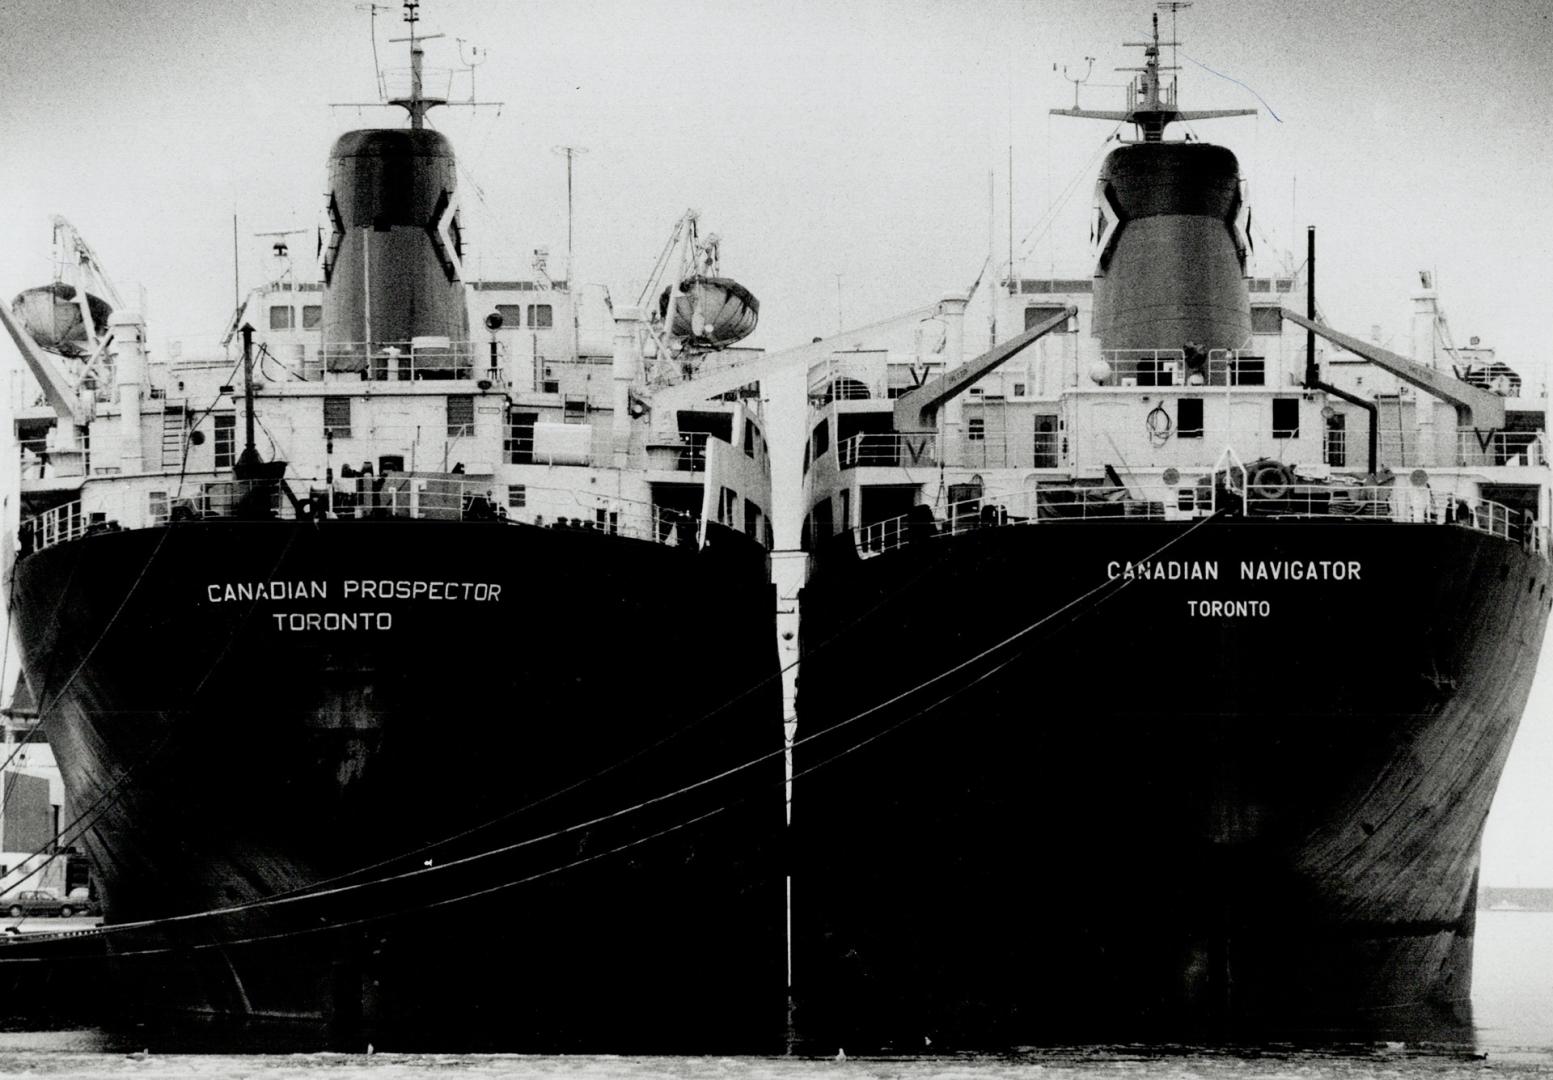 Image shows the front of two ships.